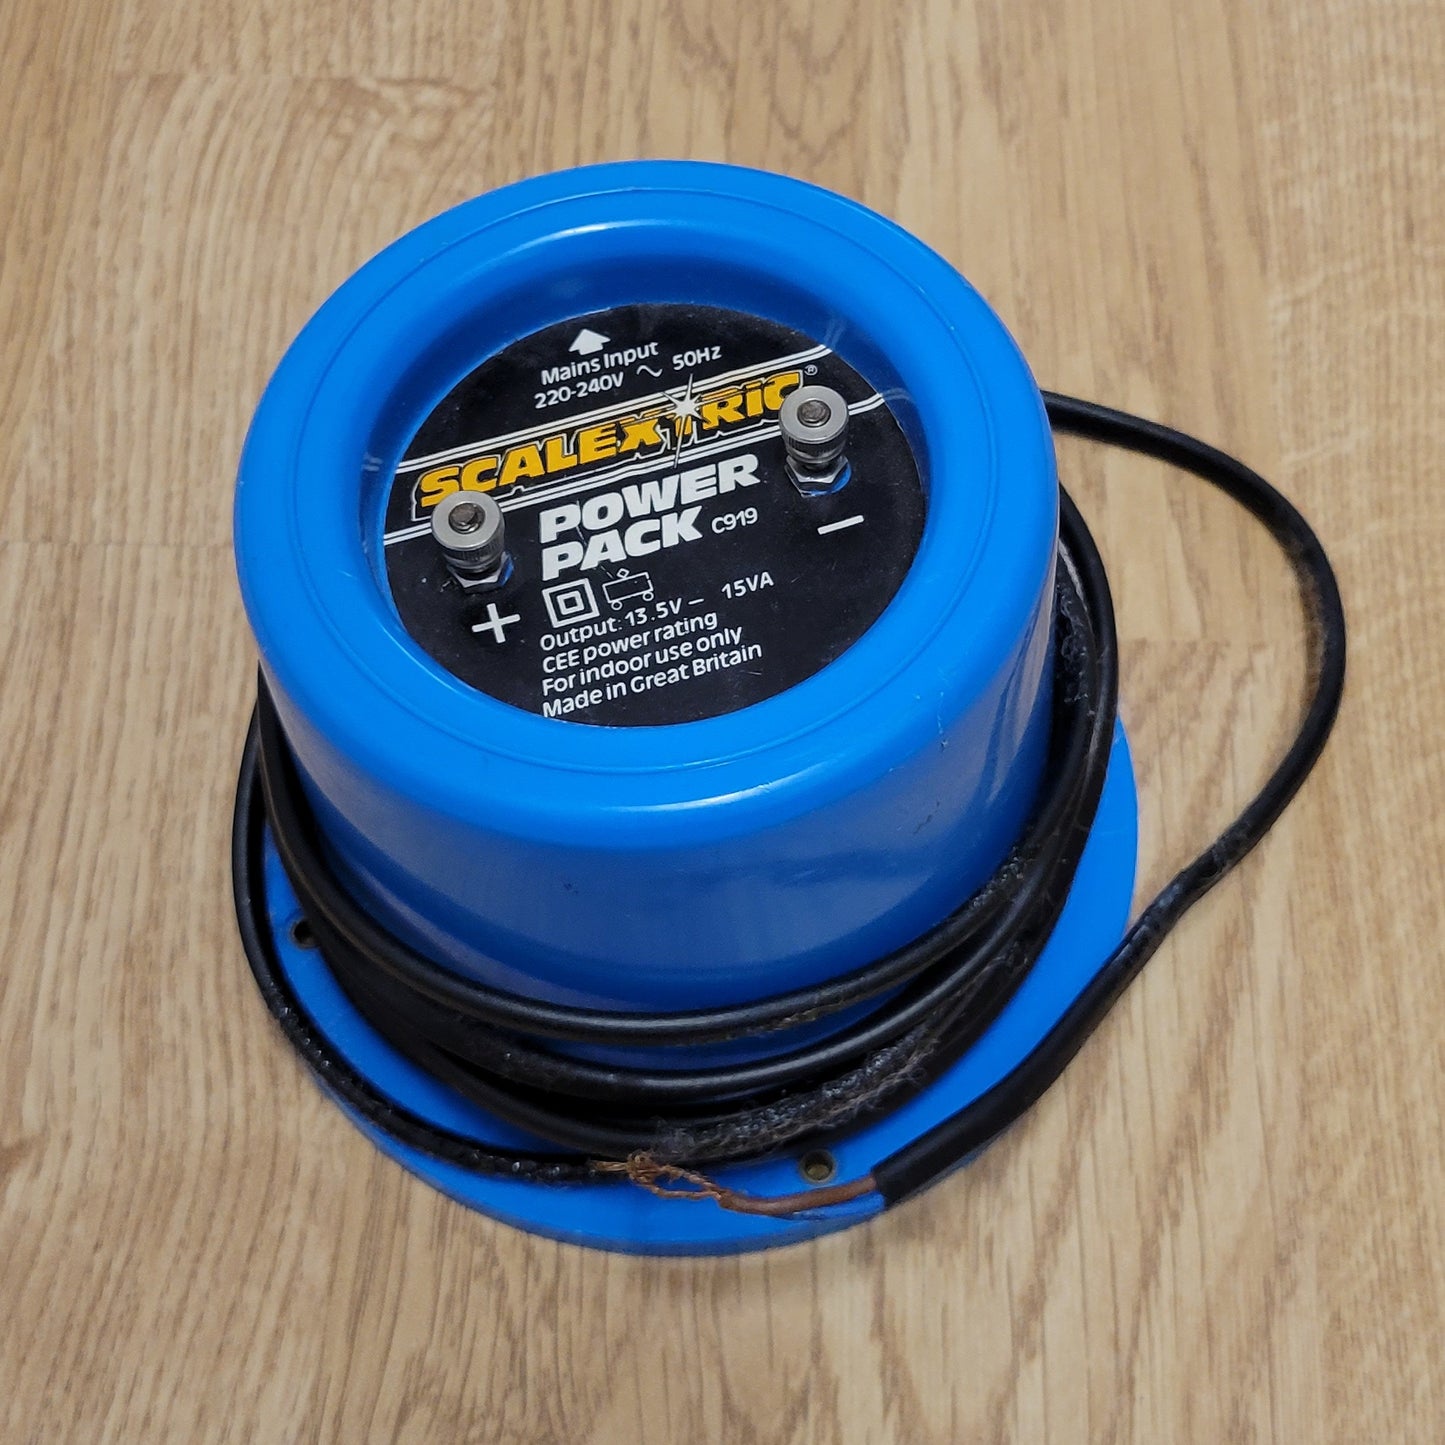 Scalextric Classic Power Pack C919 - Blue Round Type 13.5V (No Plug)